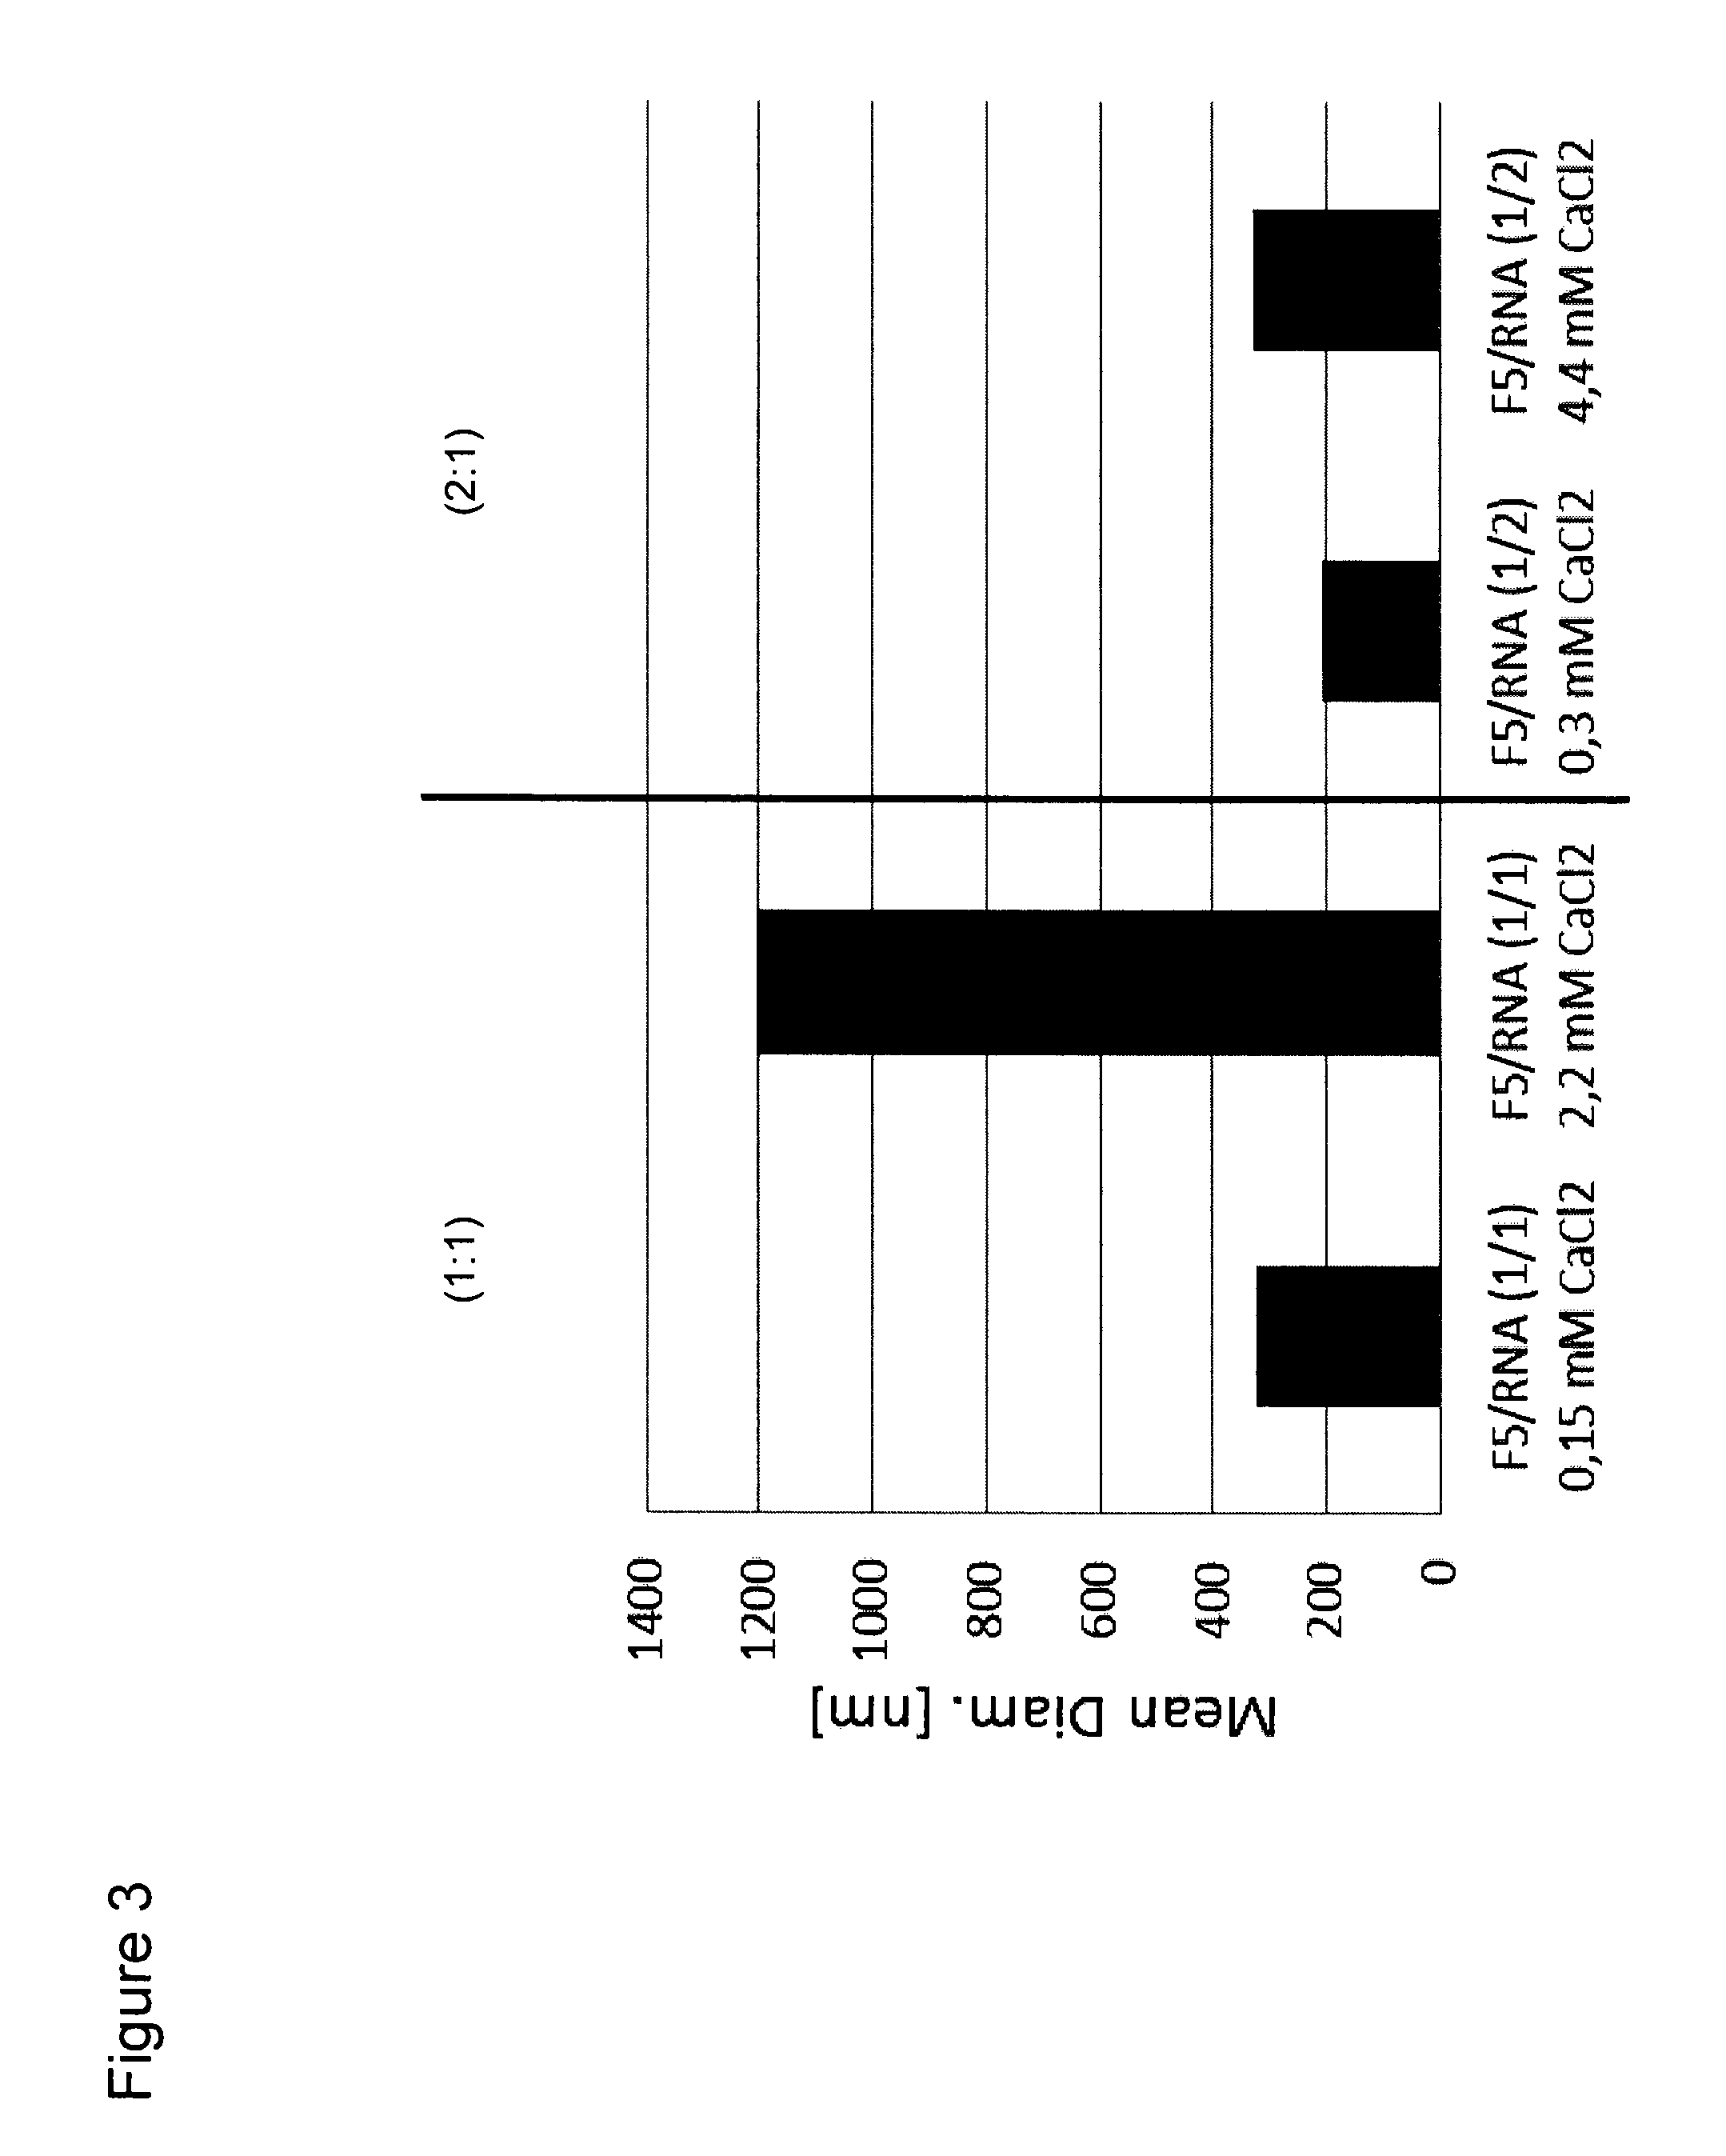 RNA Formulation for Immunotherapy